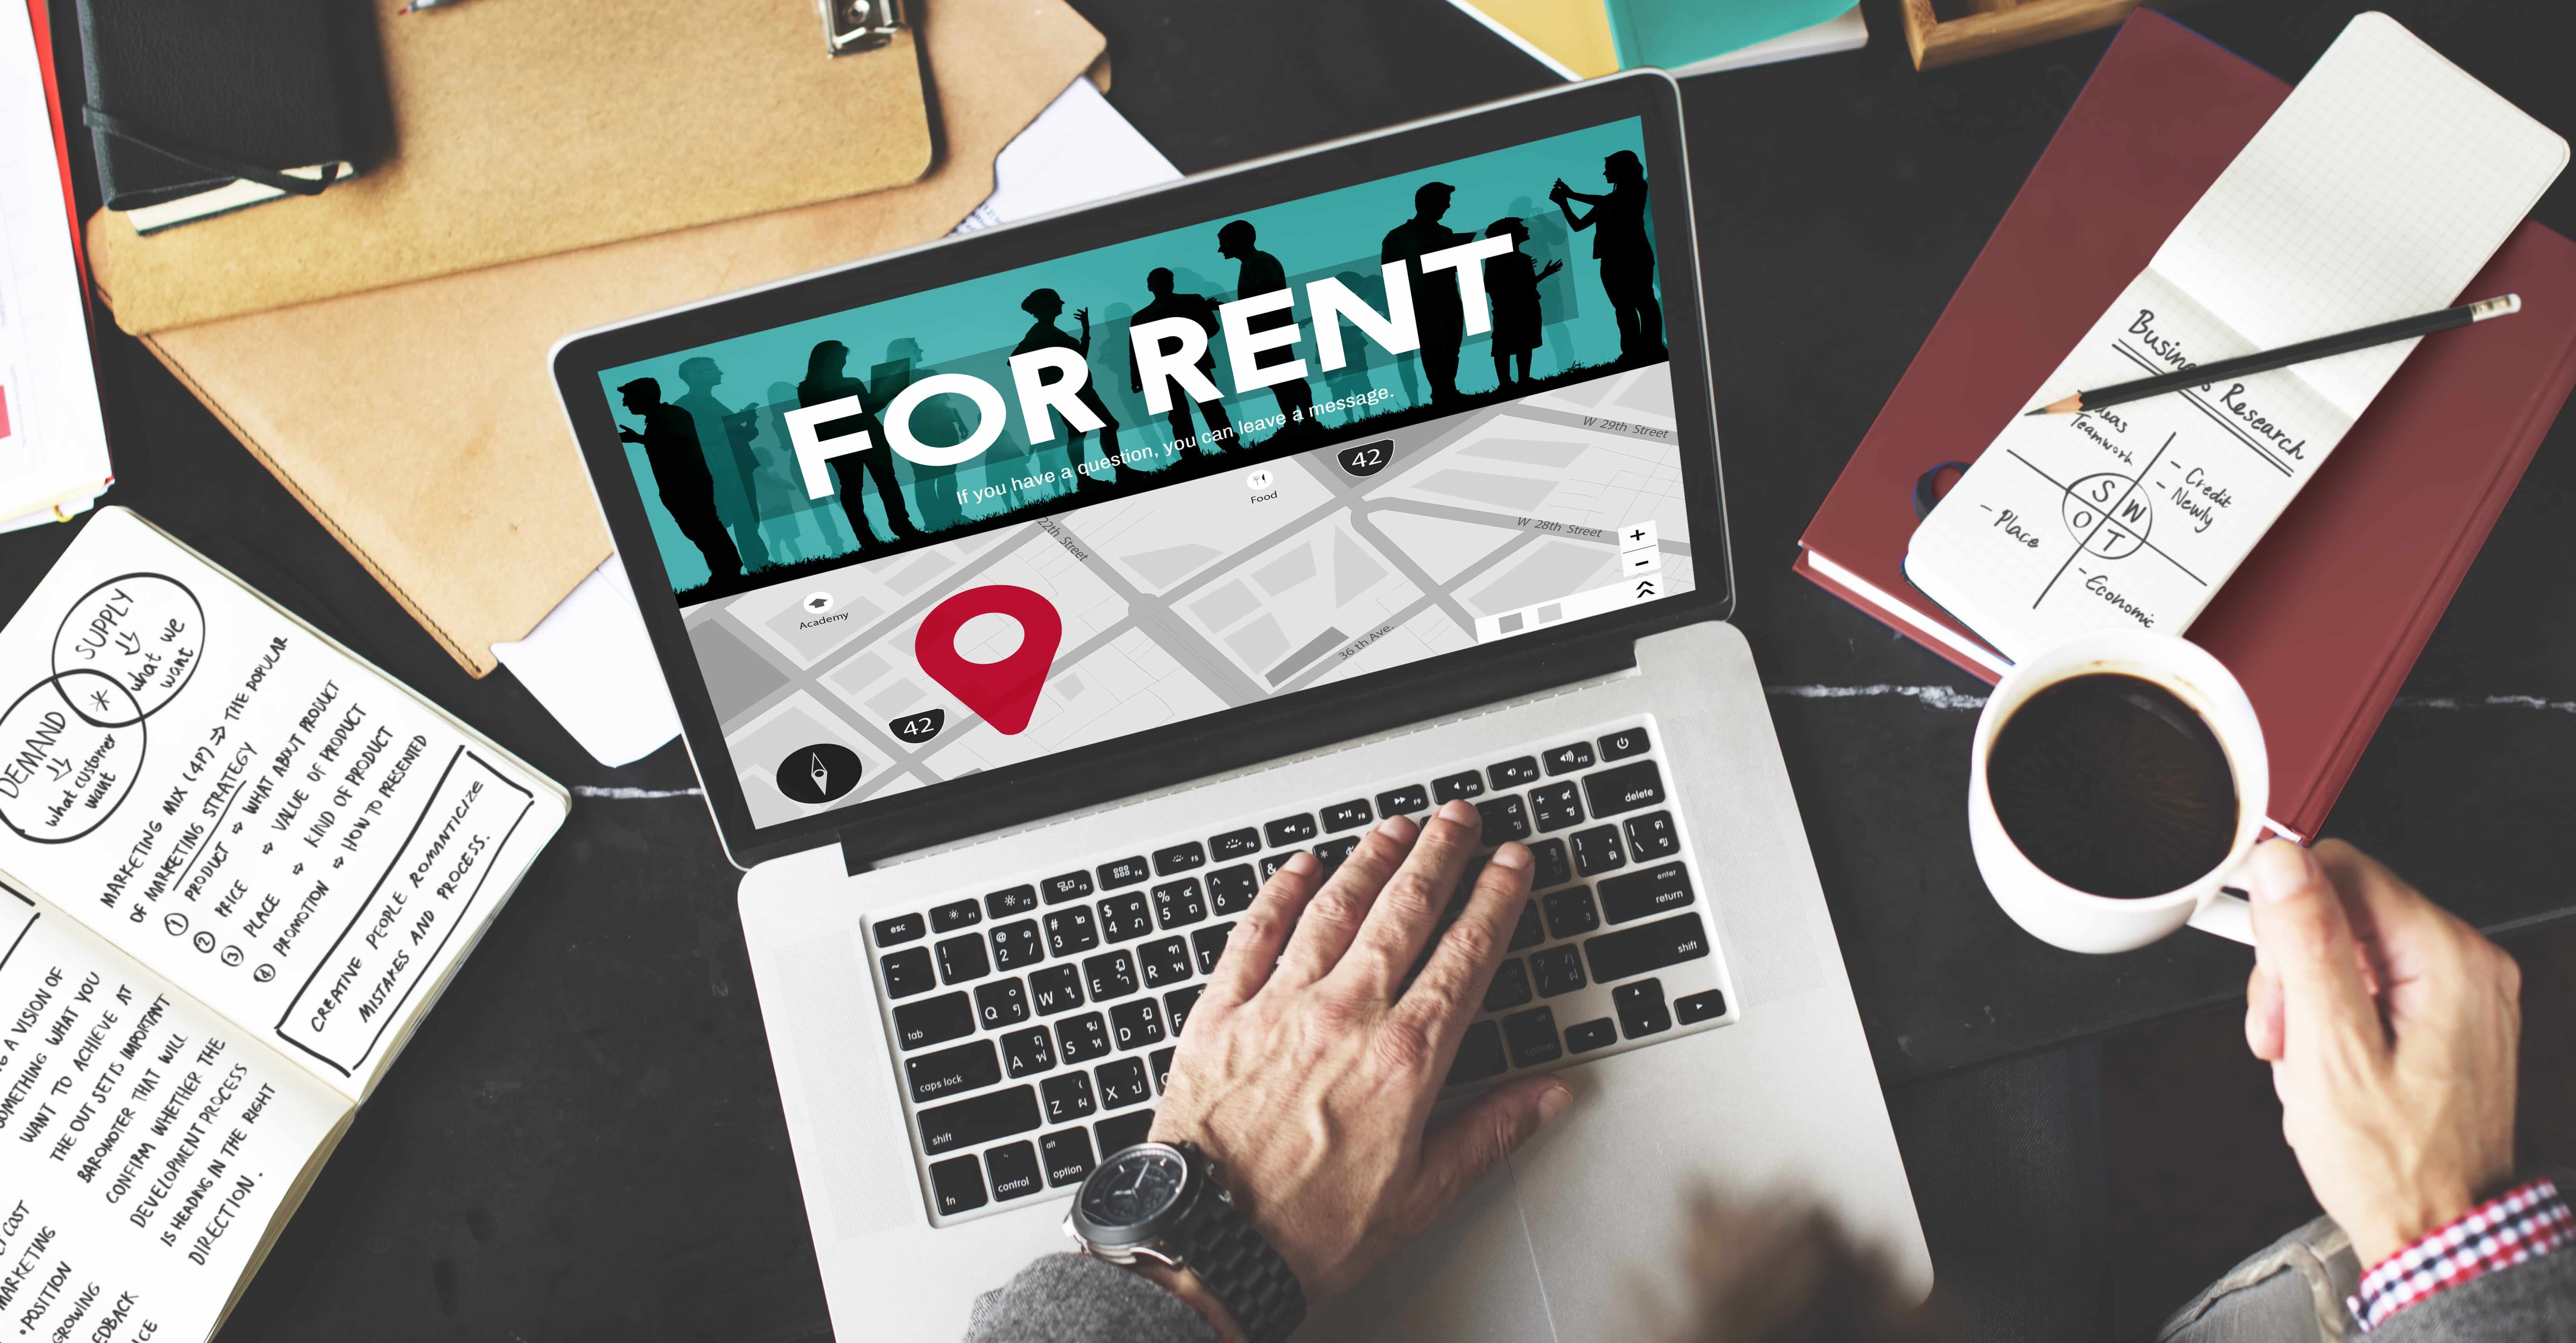 Image of a laptop with "For Rent" depicted